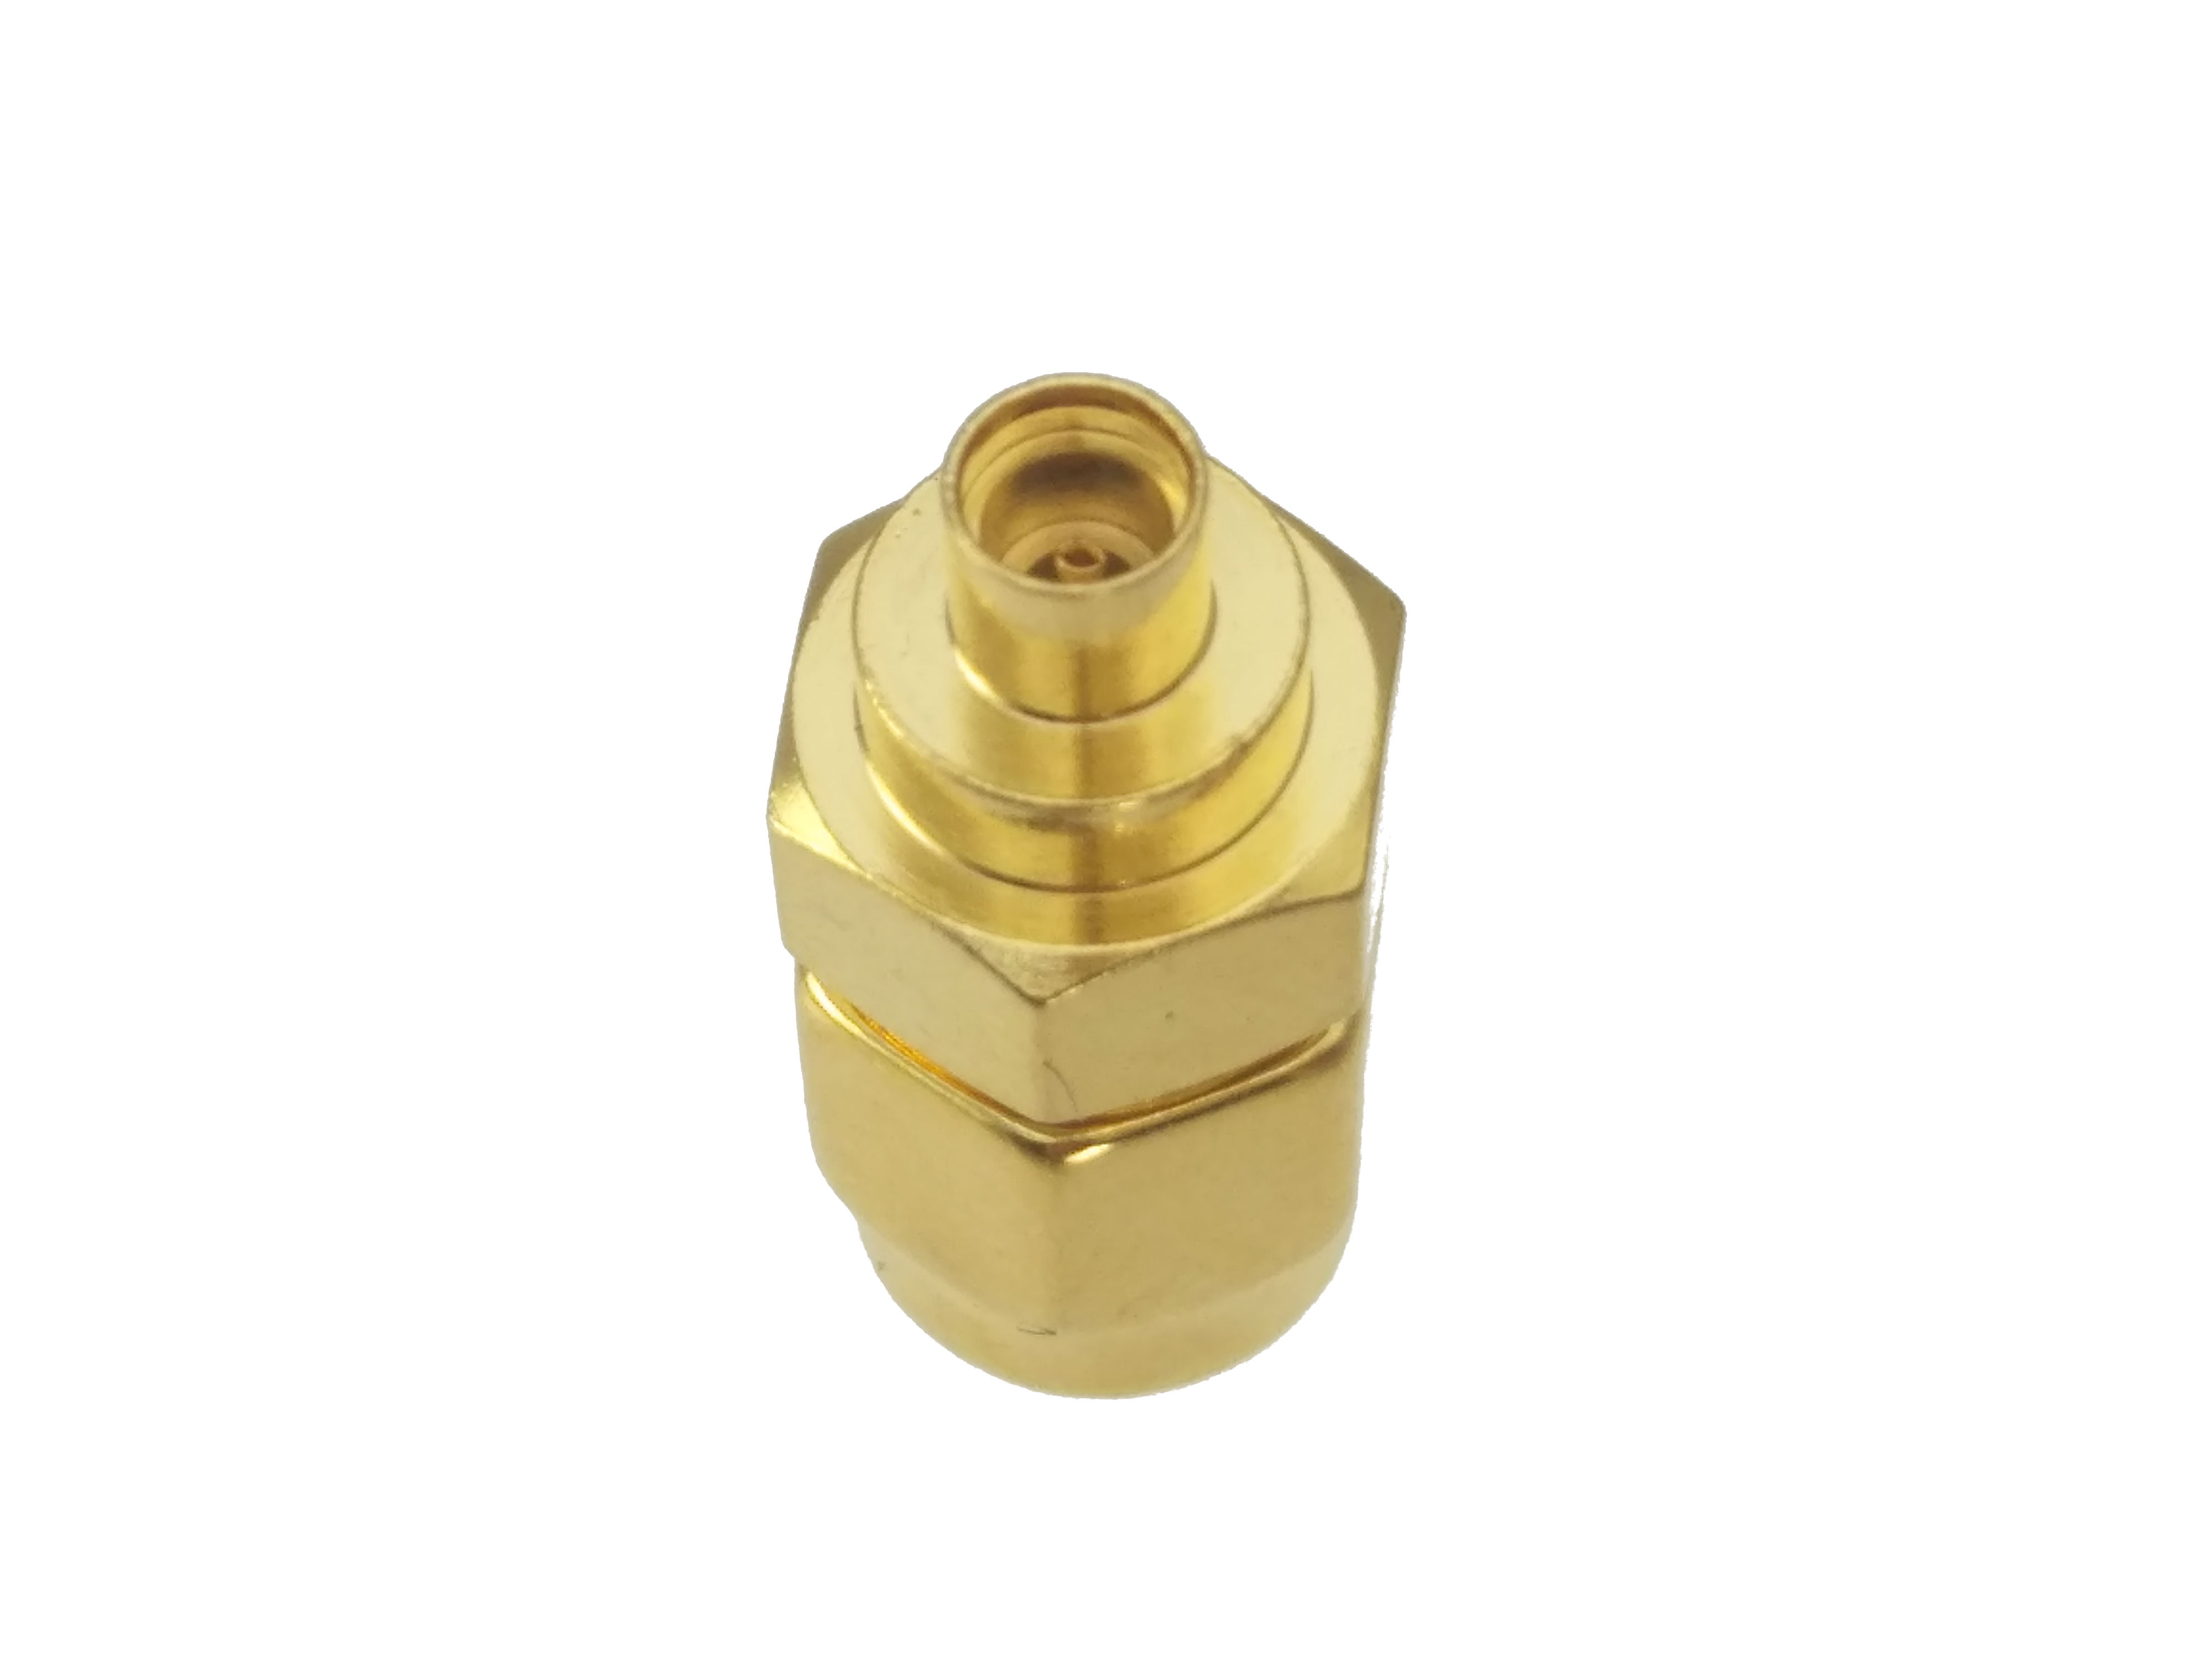 1pce SMA male plug to MMCX female jack RF coaxial adapter connector